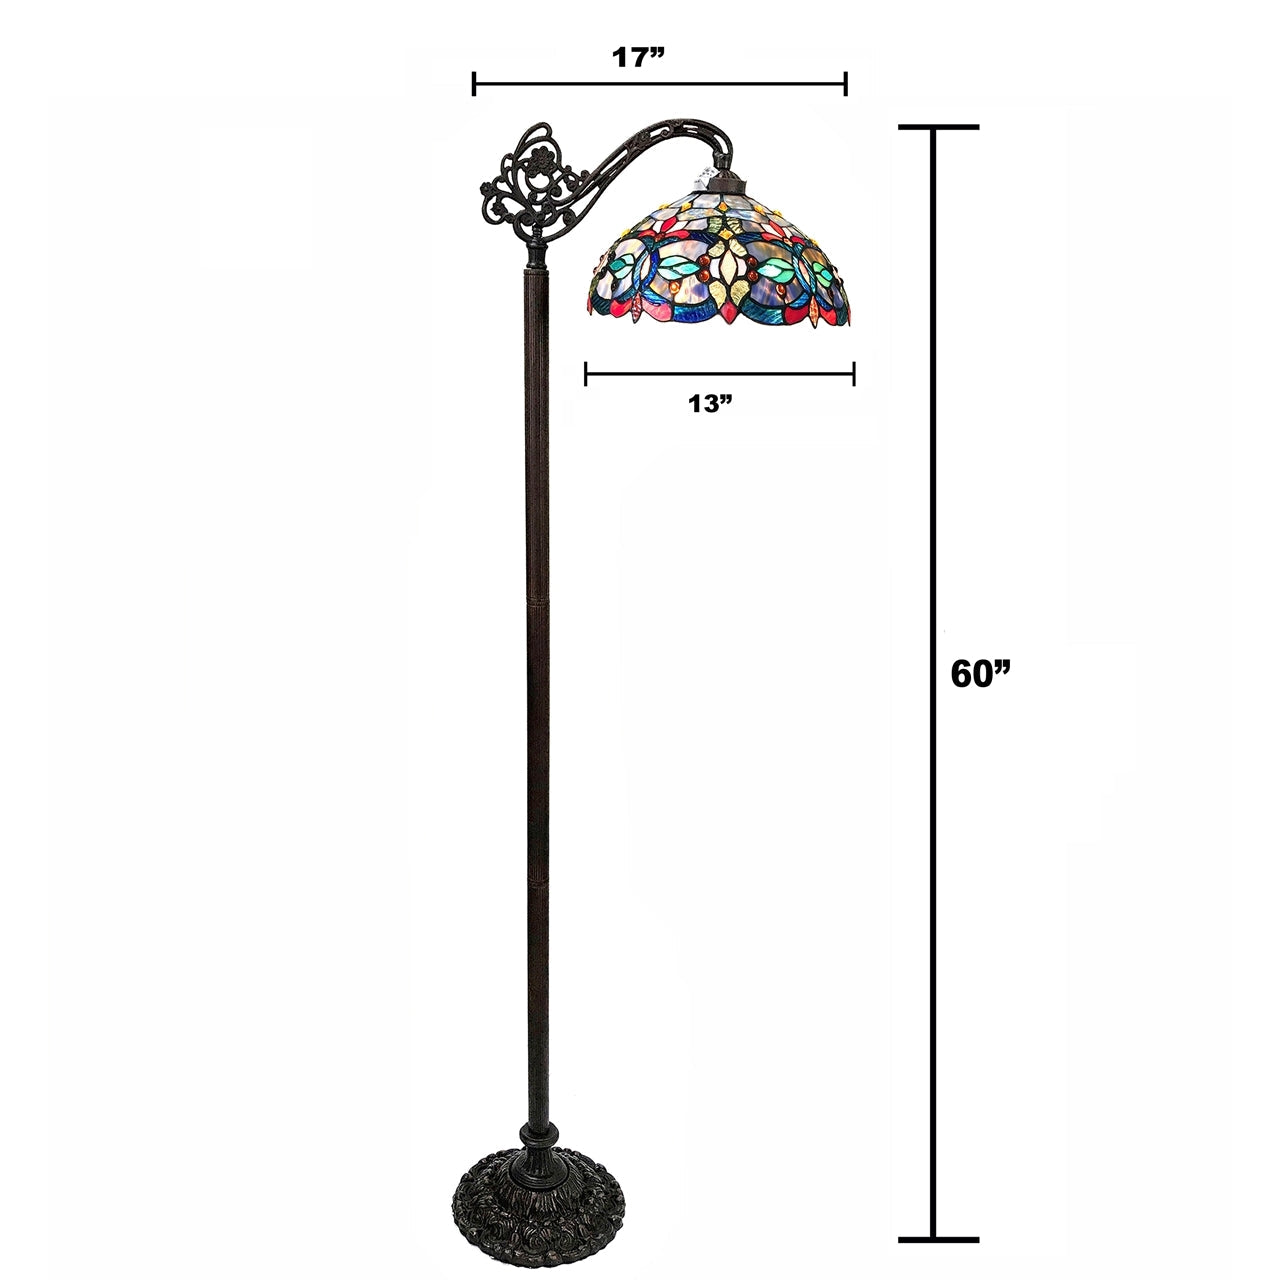 CHLOE Vivian -Style Victorian Stained Glass Reading Floor Lamp 60" Height